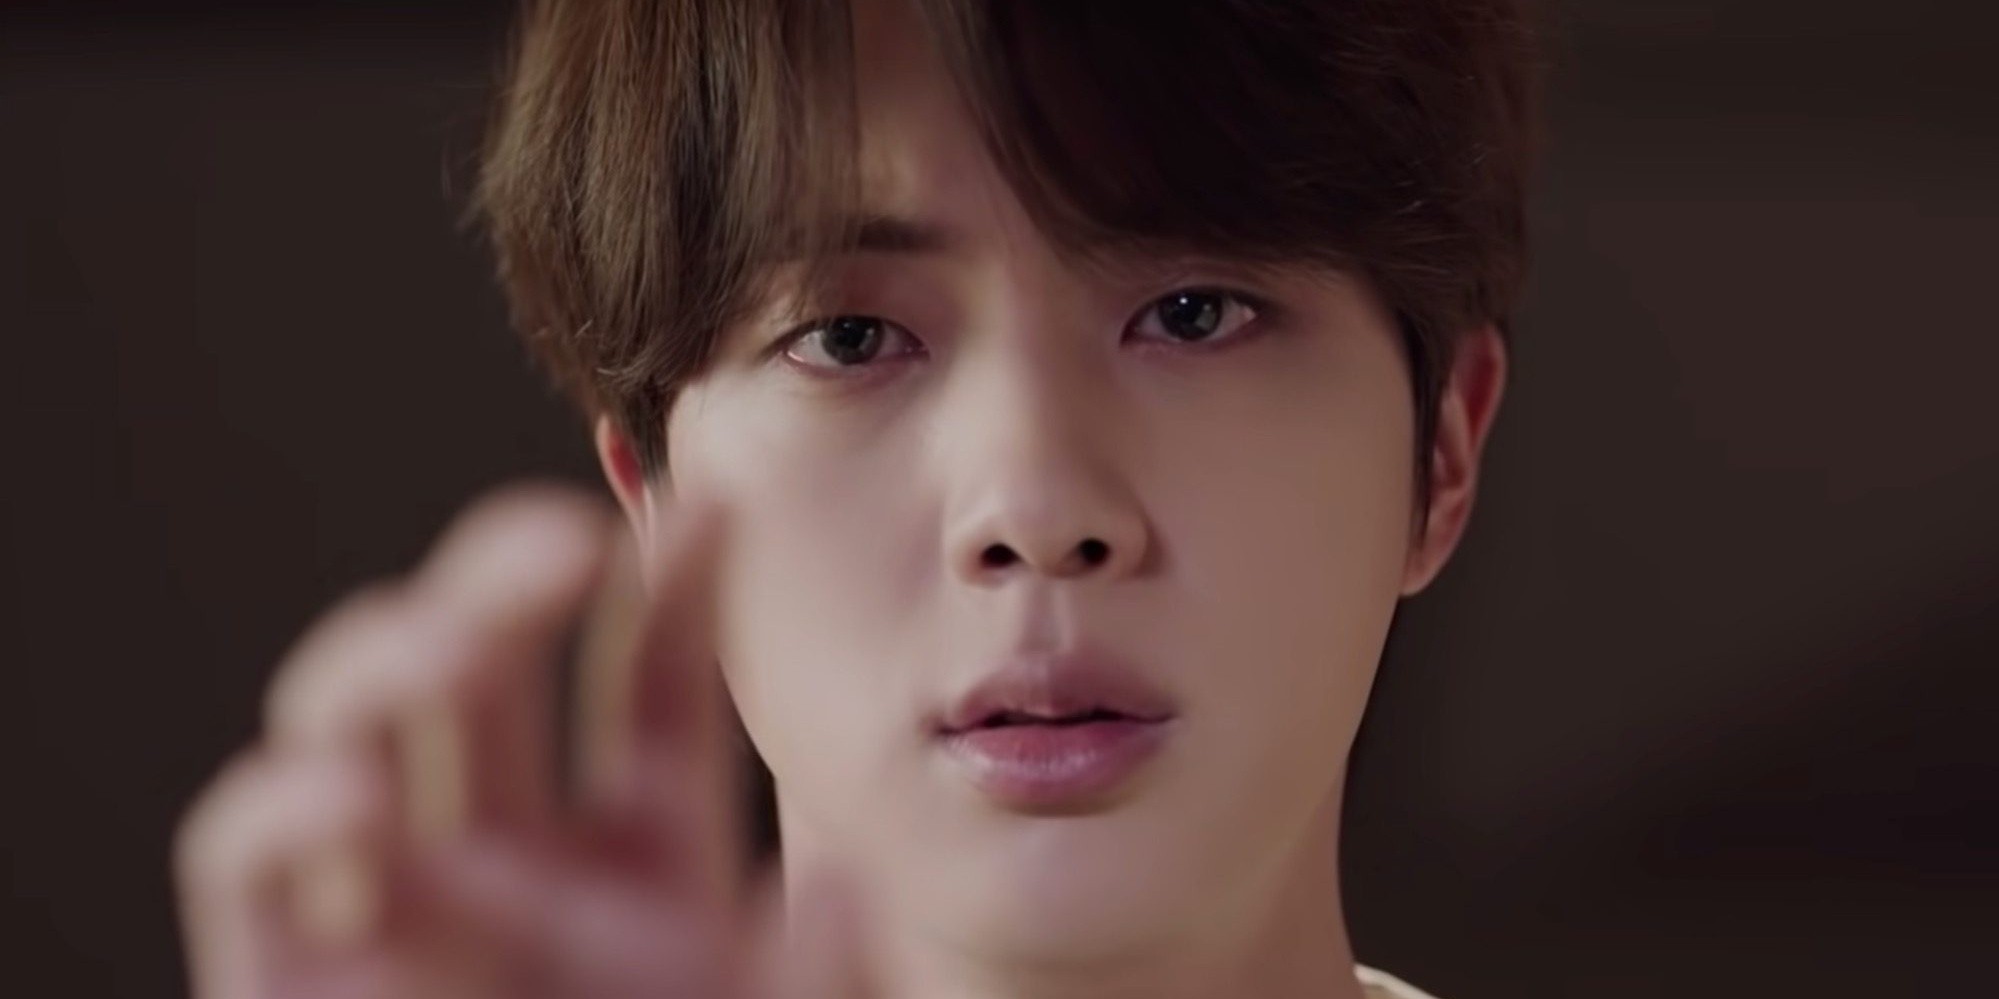 BTS' Jin tops World Digital Songs chart with 'Jirisan' theme song, 'Yours' 